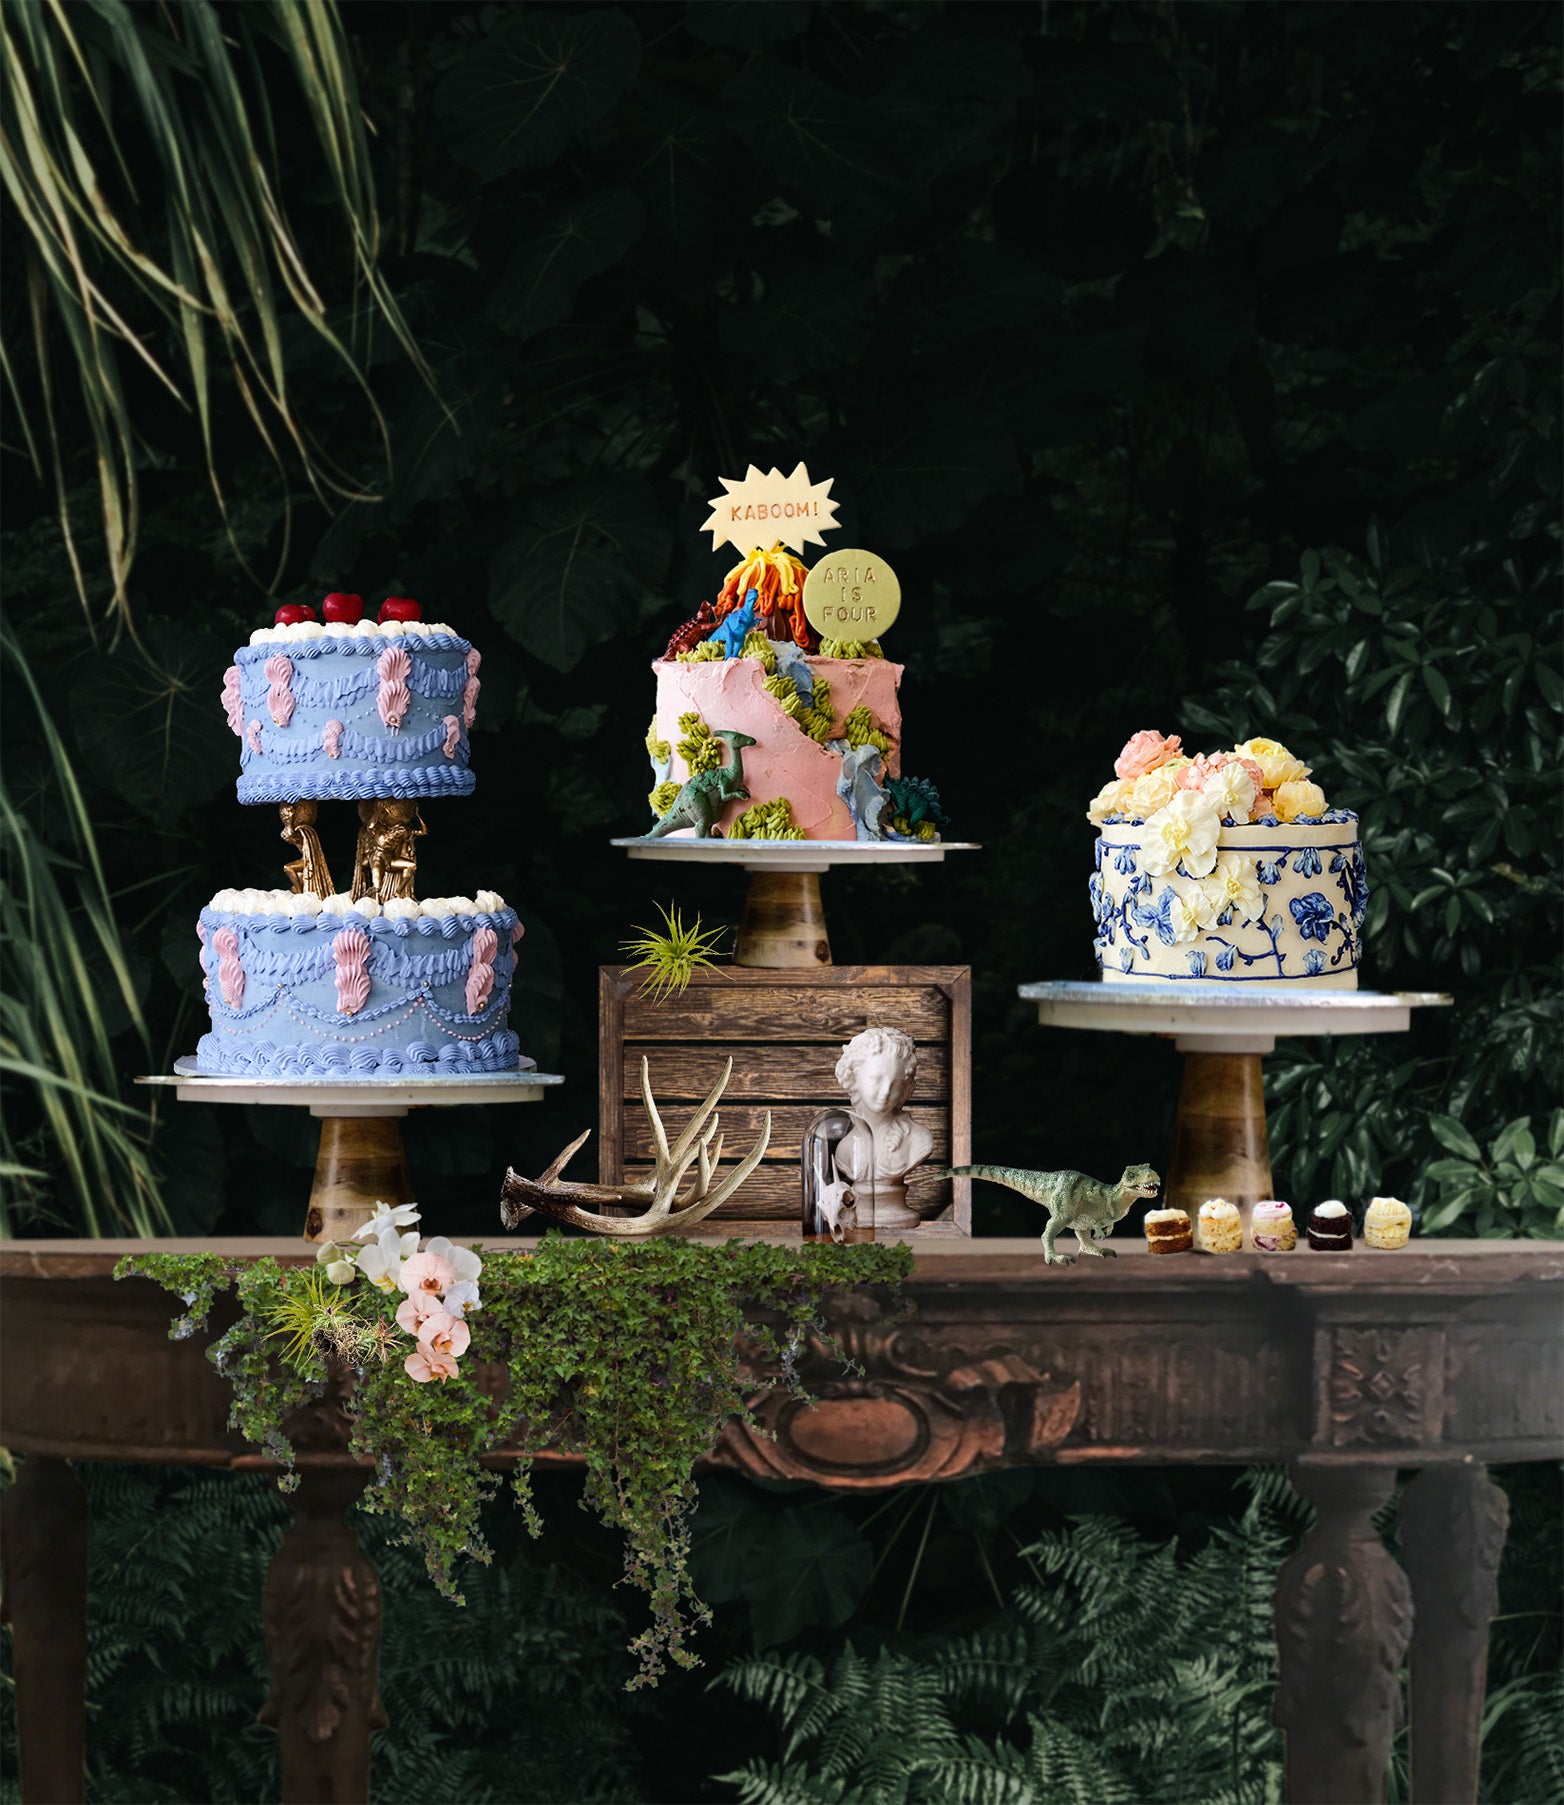 The 10 Best Wedding Cakes in Edinburgh | hitched.co.uk